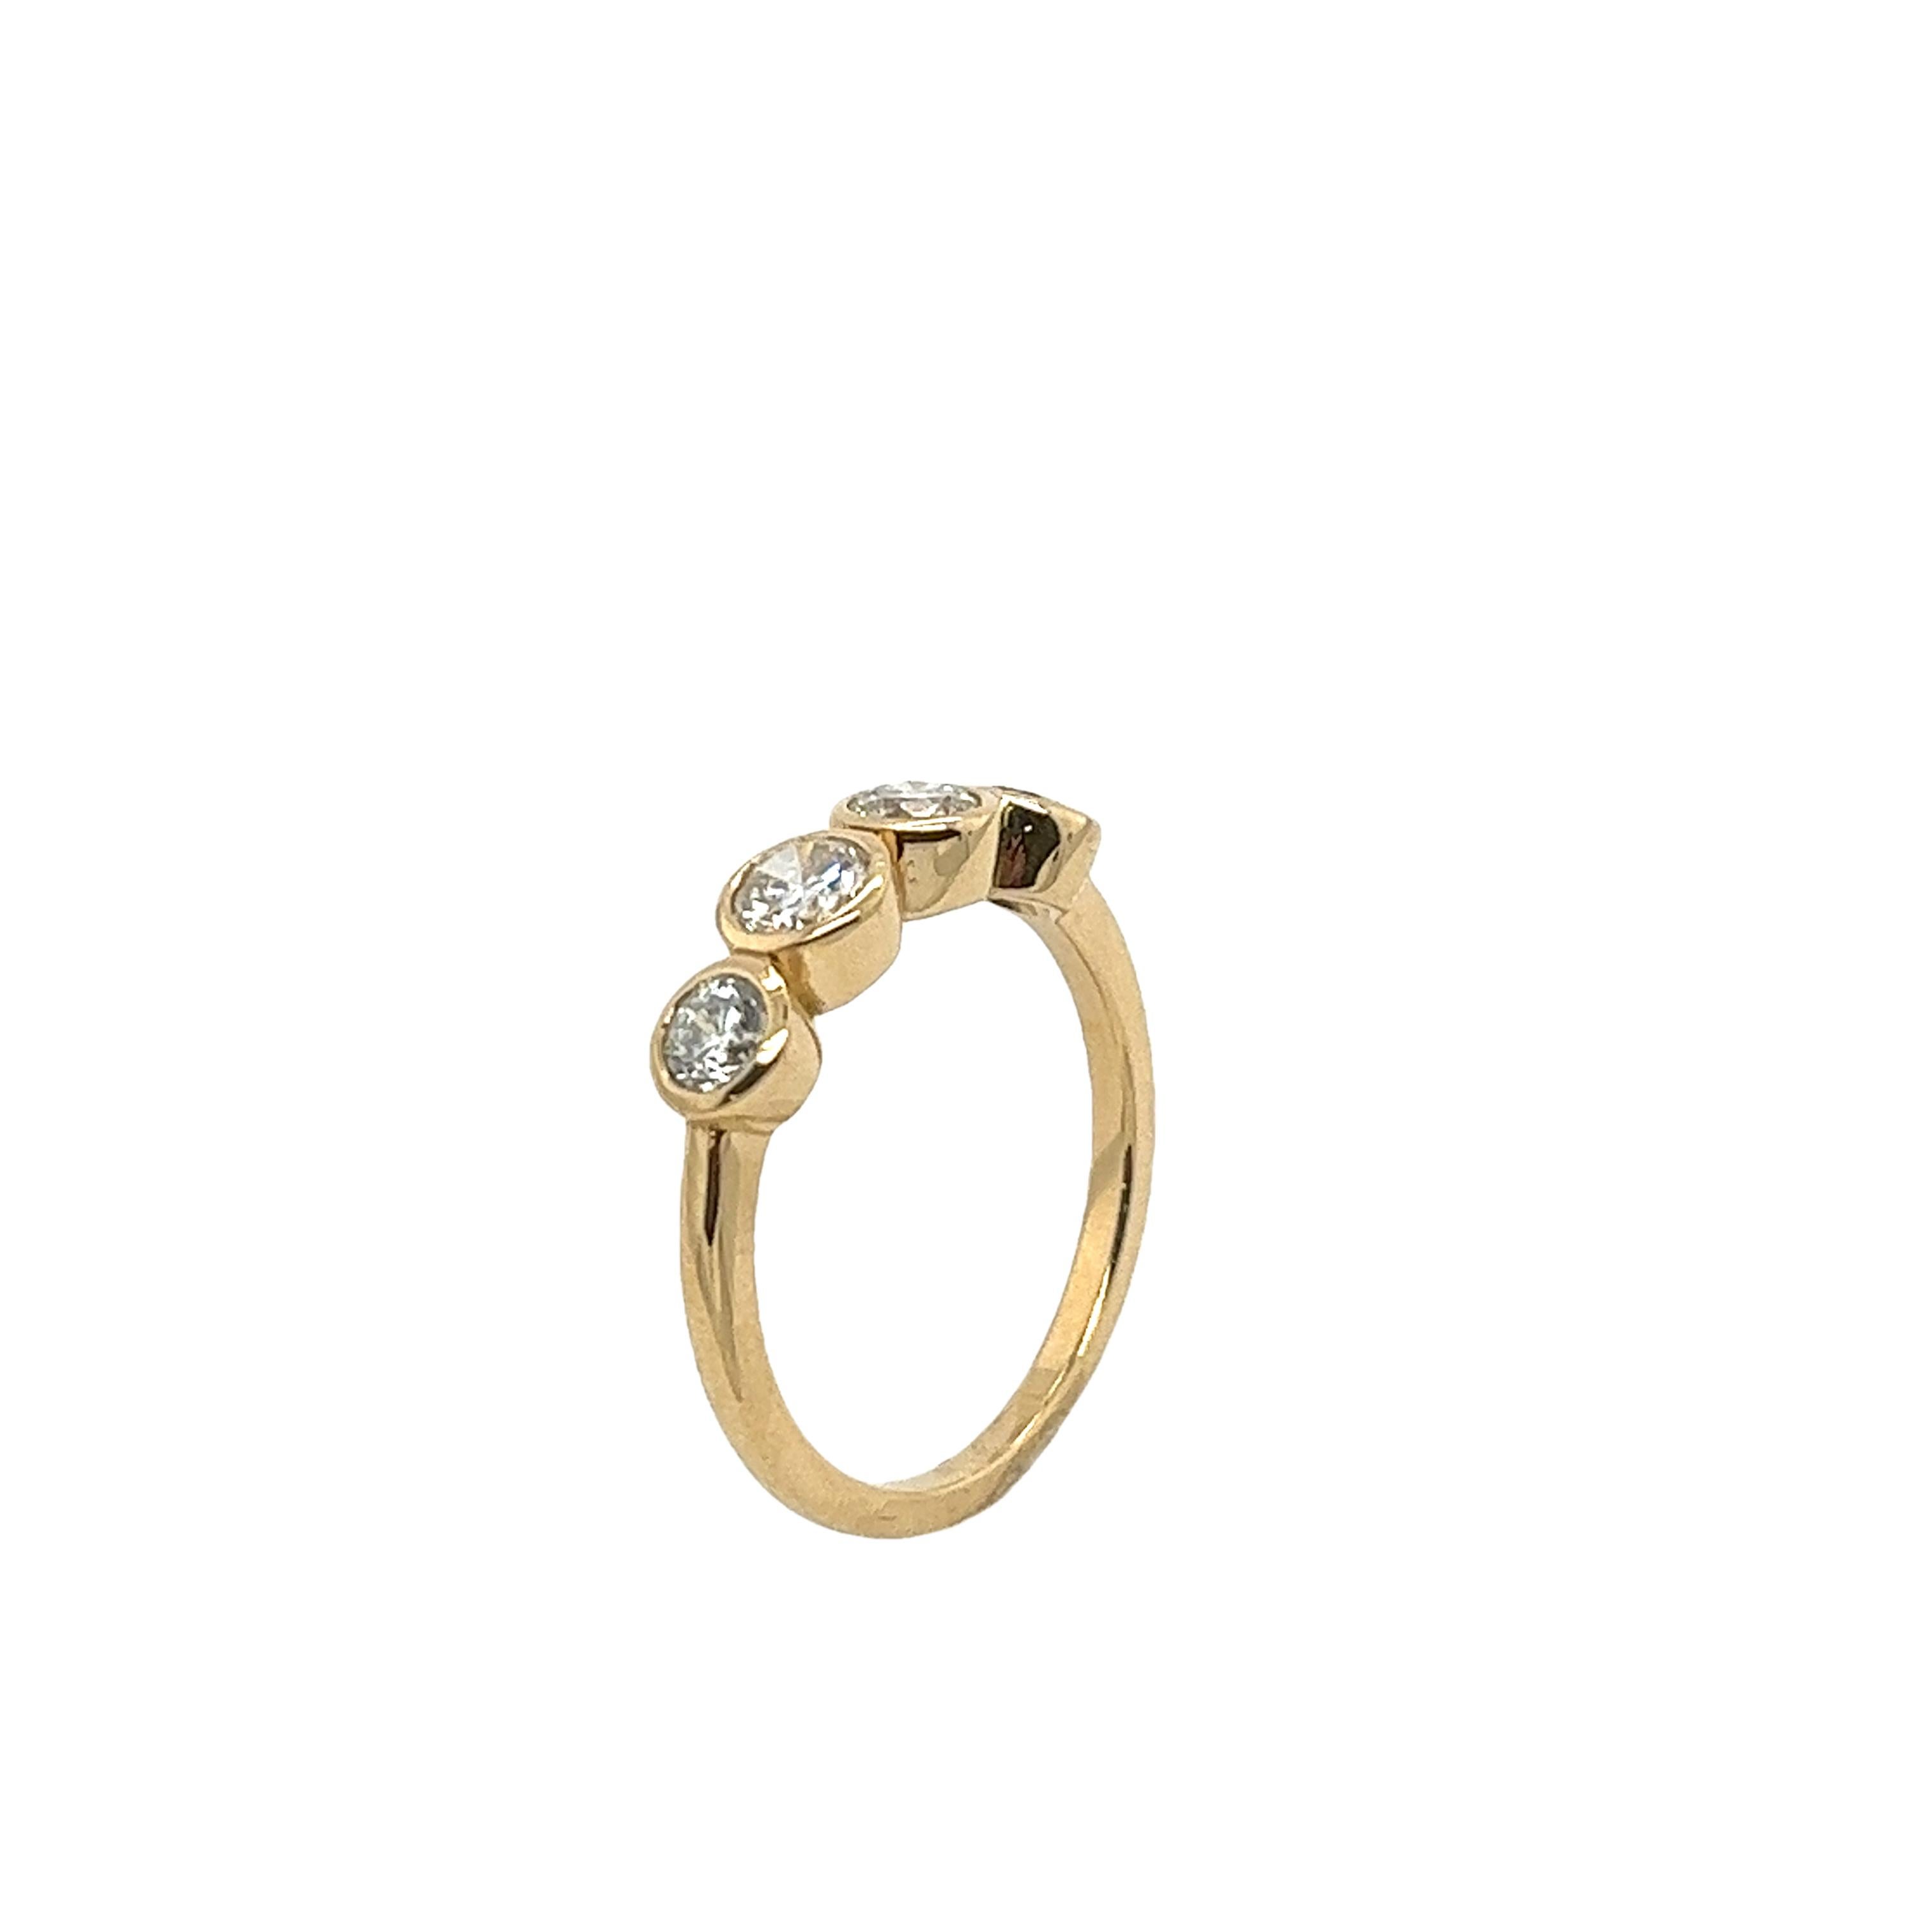 An elegant 4 stone diamond ring, 
set with 4 round brilliant cut natural diamonds, 
0.94ct total diamond weight.
in an 18ct yellow-gold bezel setting.
Total Diamond Weight: 0.94ct
Diamond Colour: G/H
Diamond Clarity: SI1
Width of Band: 1.67mm
Width